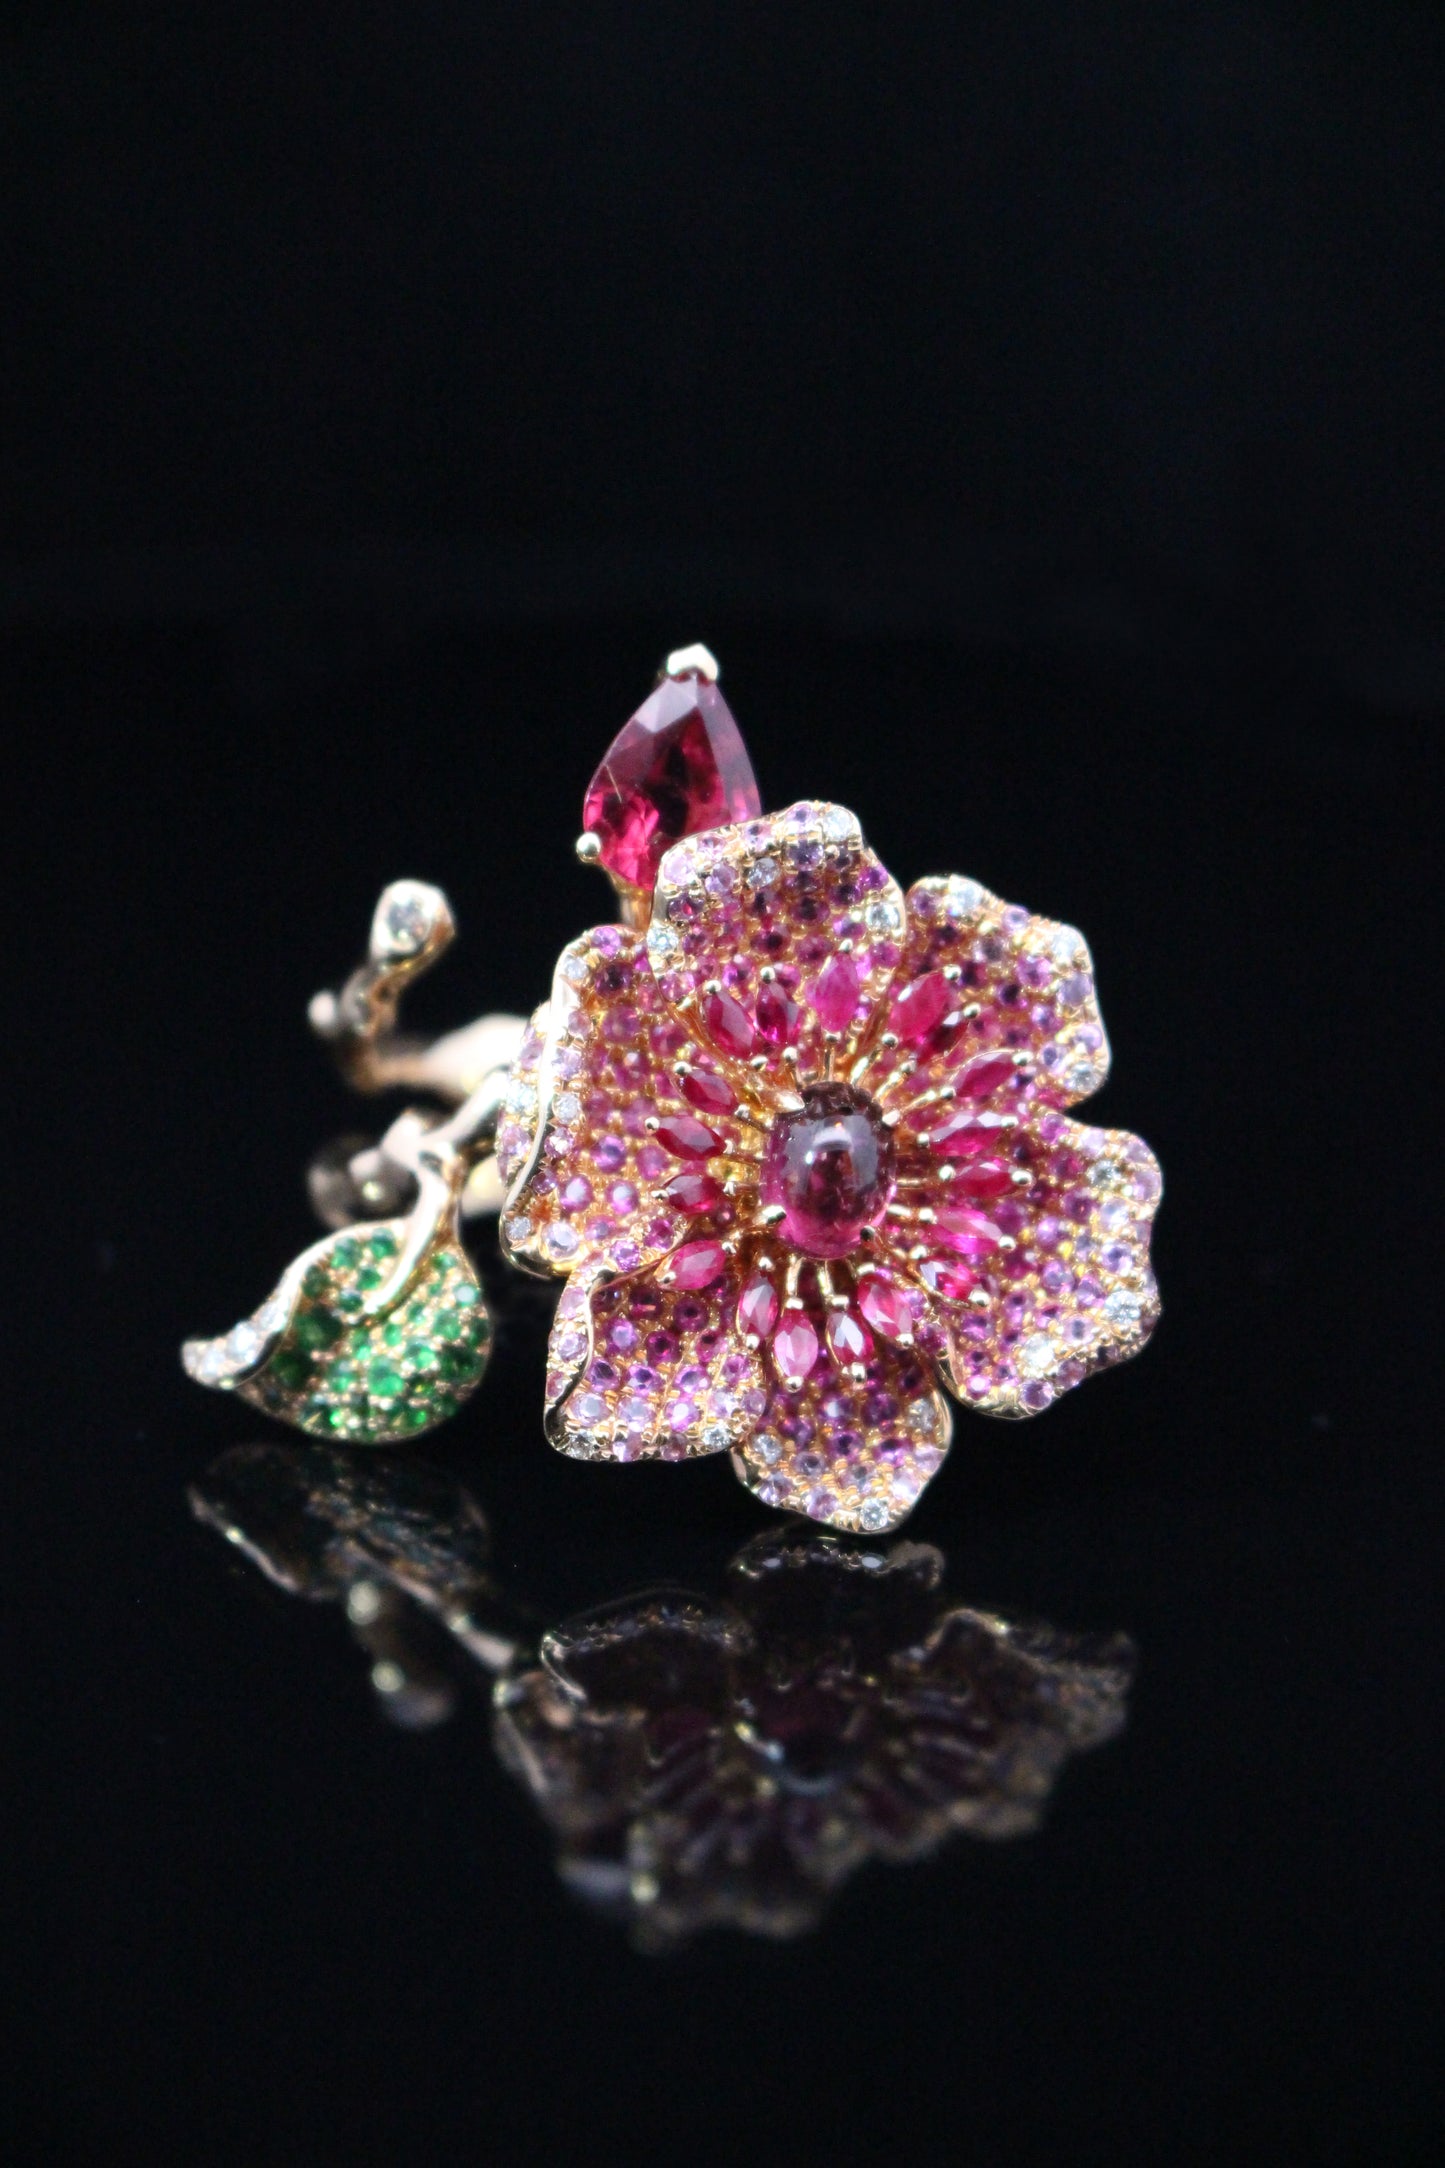 Rose Gold Pink Sapphire, Ruby, Tourmaline Single or Multi-Finger Ring from Flower Collection